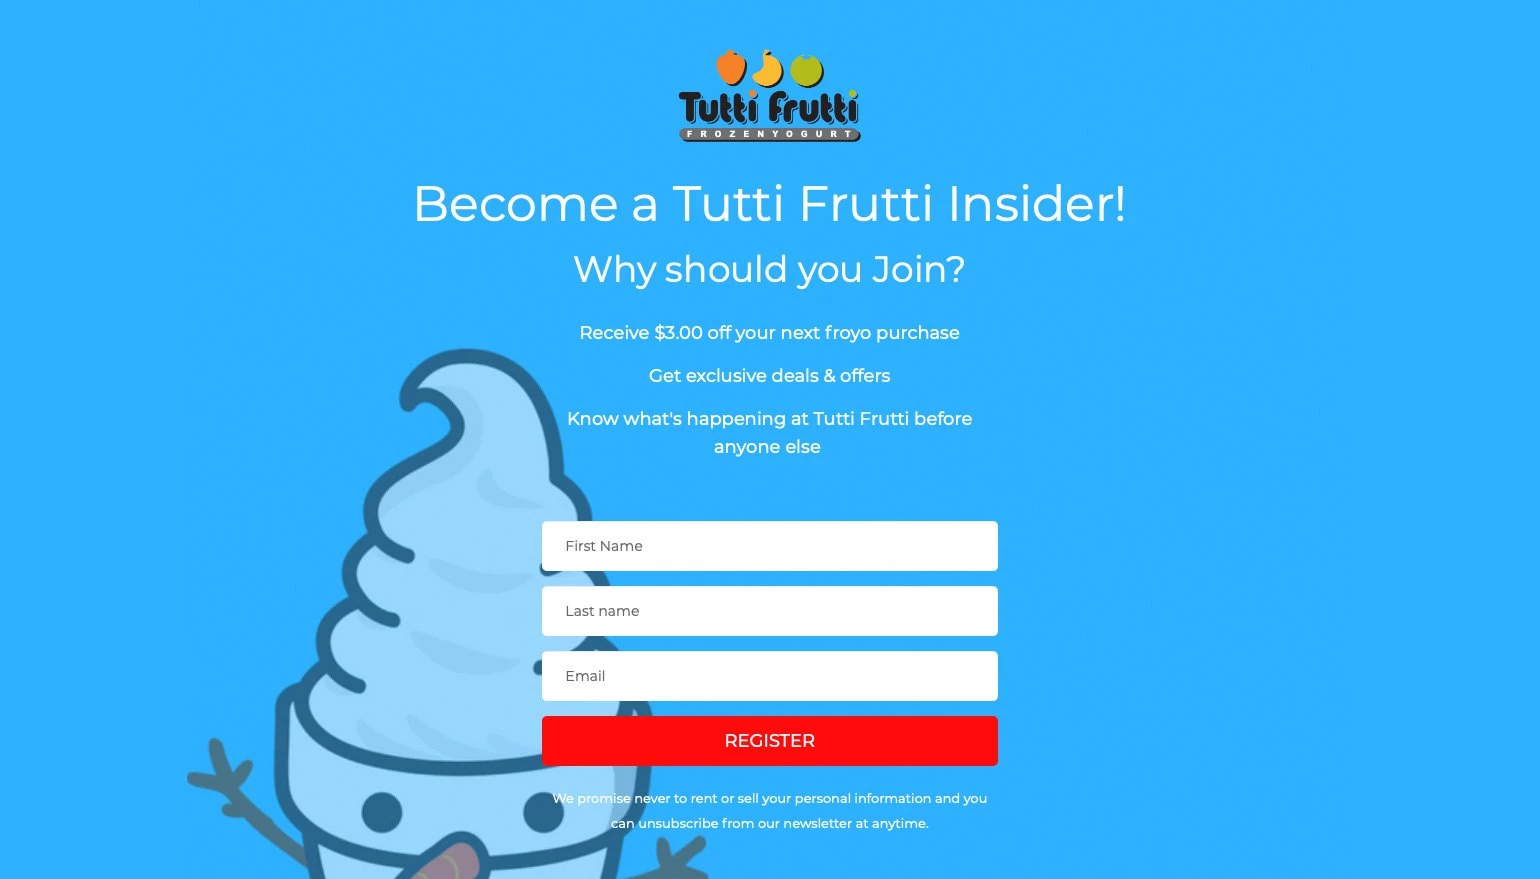 restaurant email list building - Tutti Frutti opt-in landing page